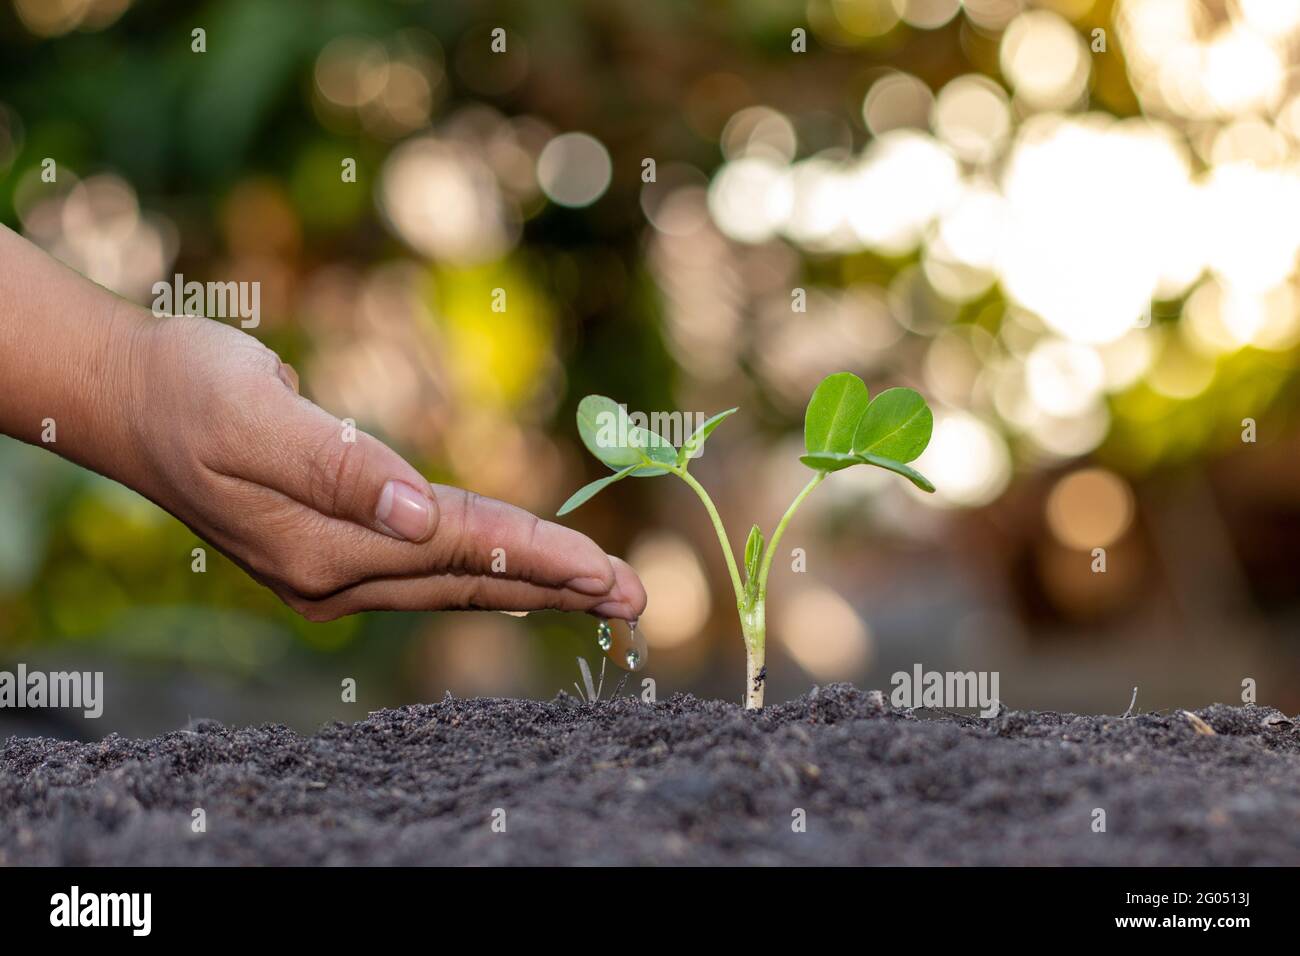 Farmer's hand planting, watering young plants in green background, concept of natural plant seeding and growing. Stock Photo